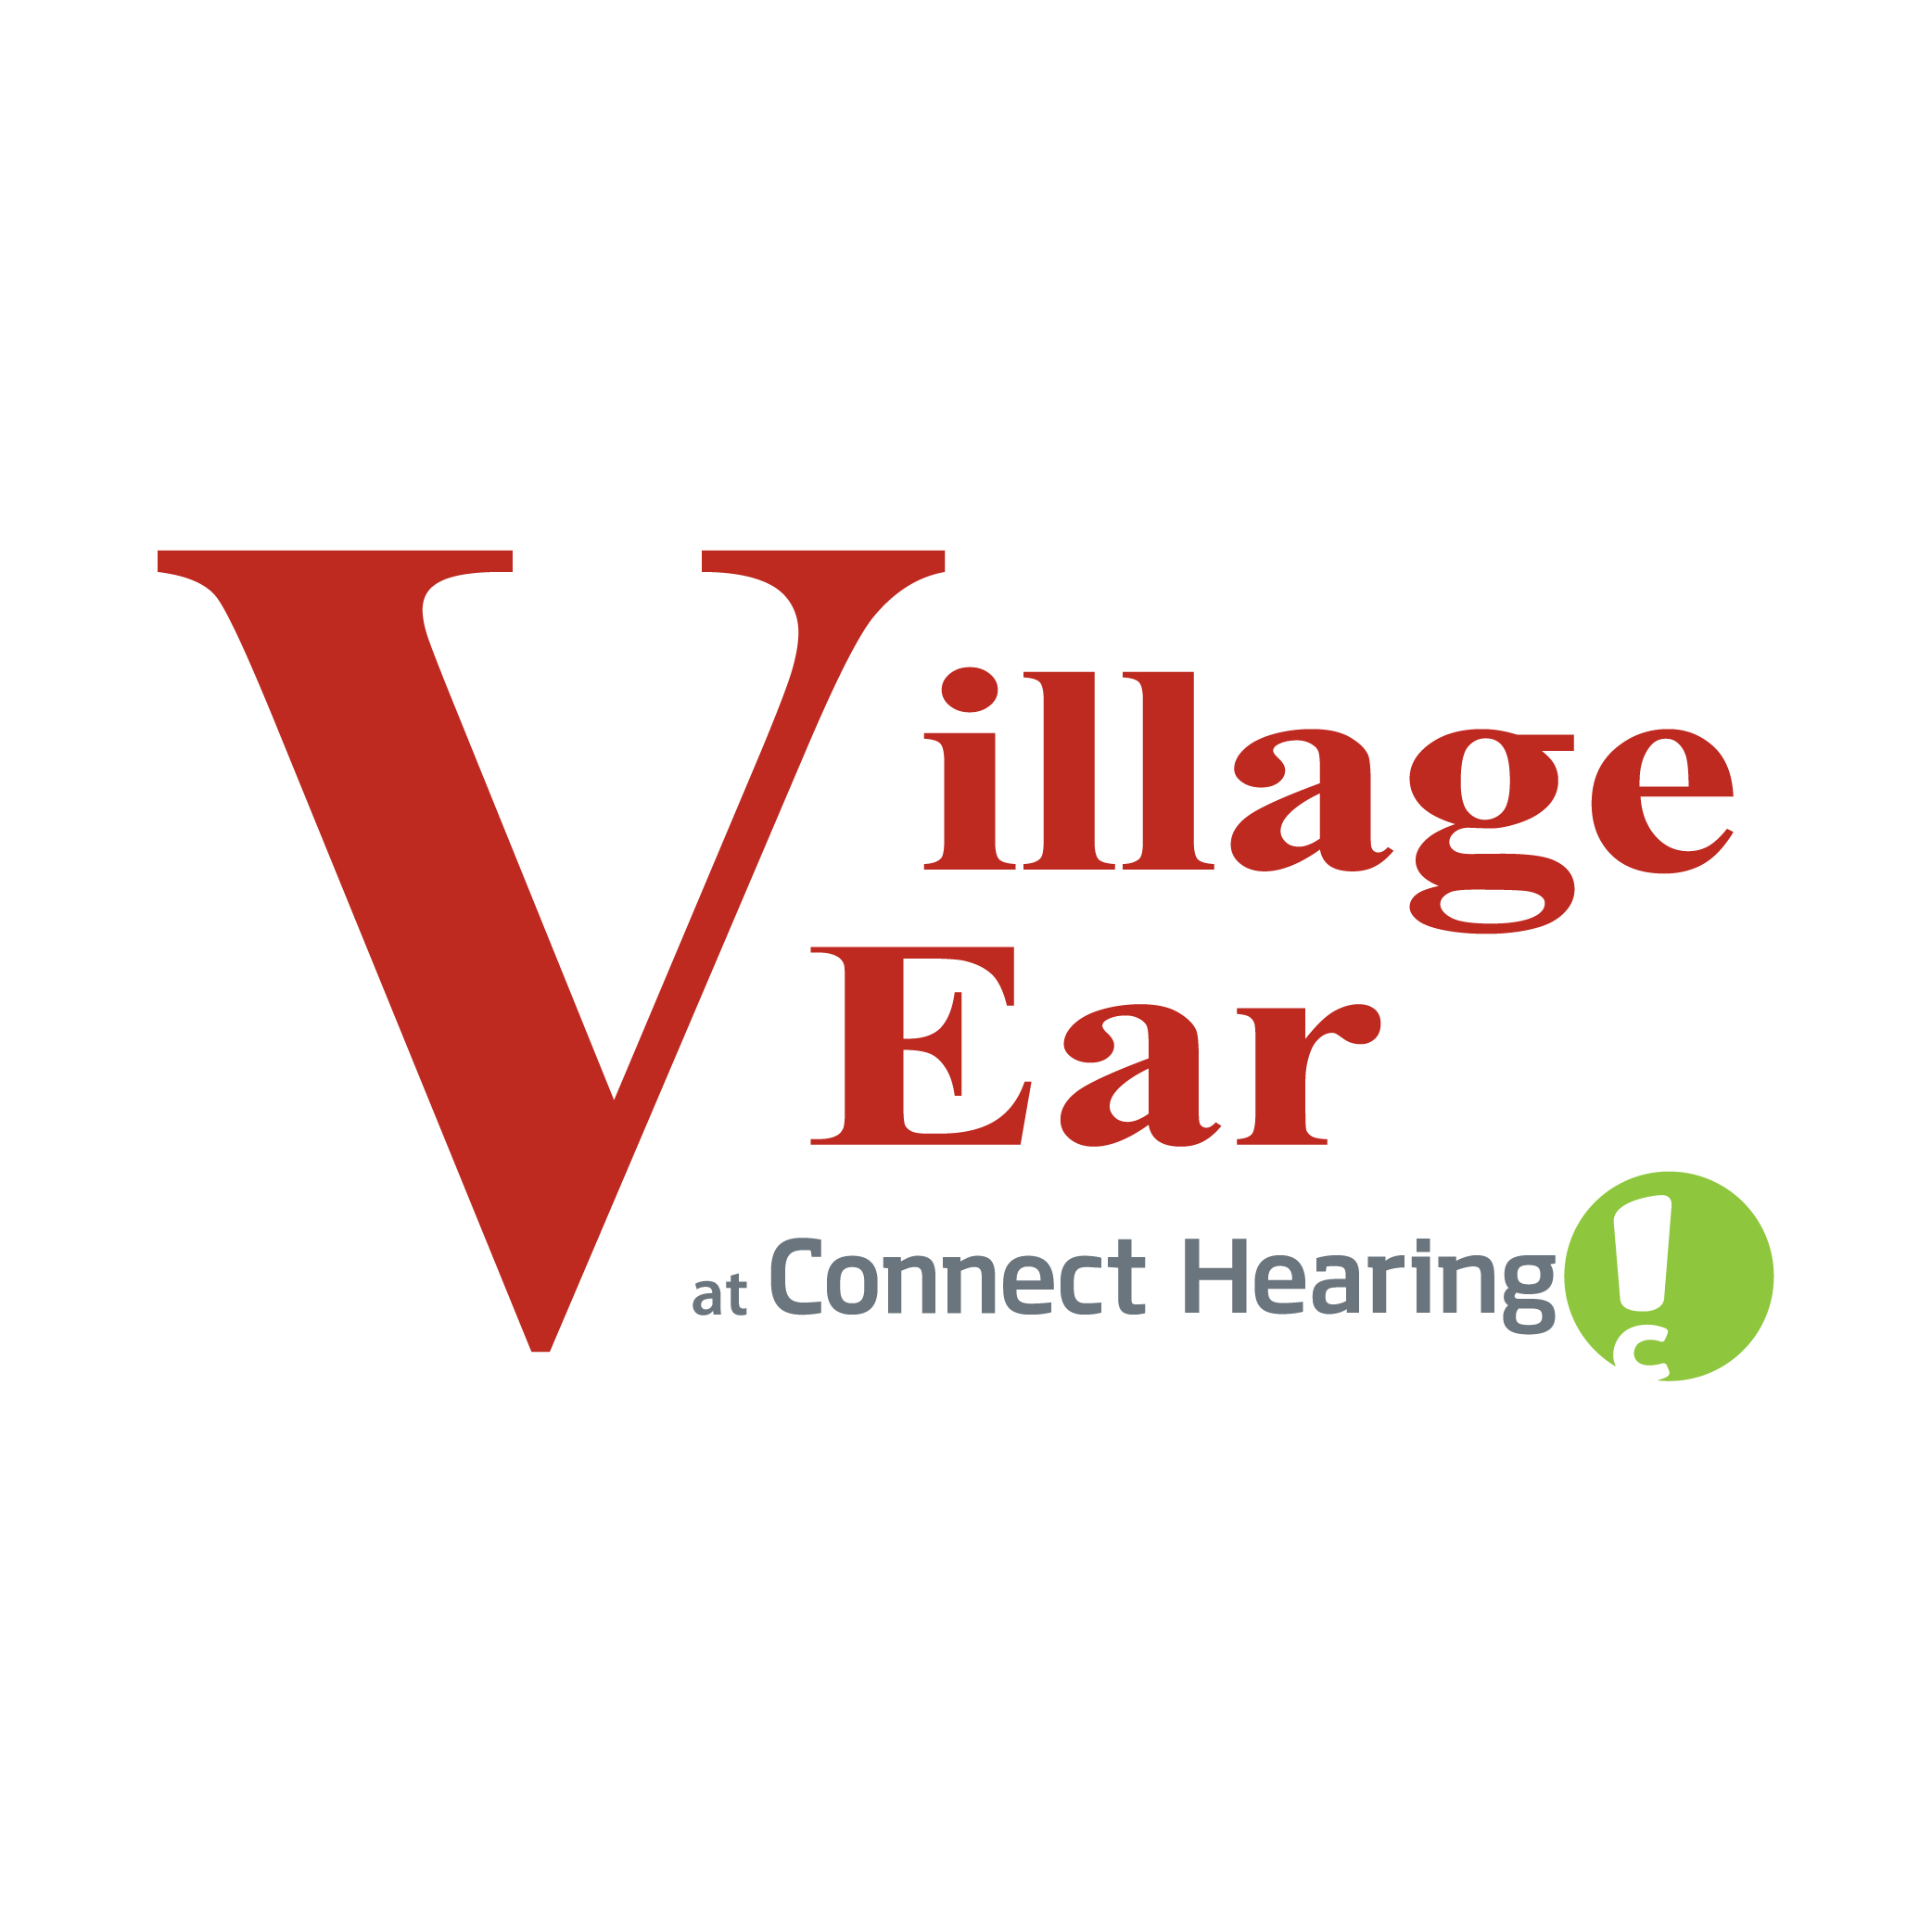 Village Ear at Connect Hearing